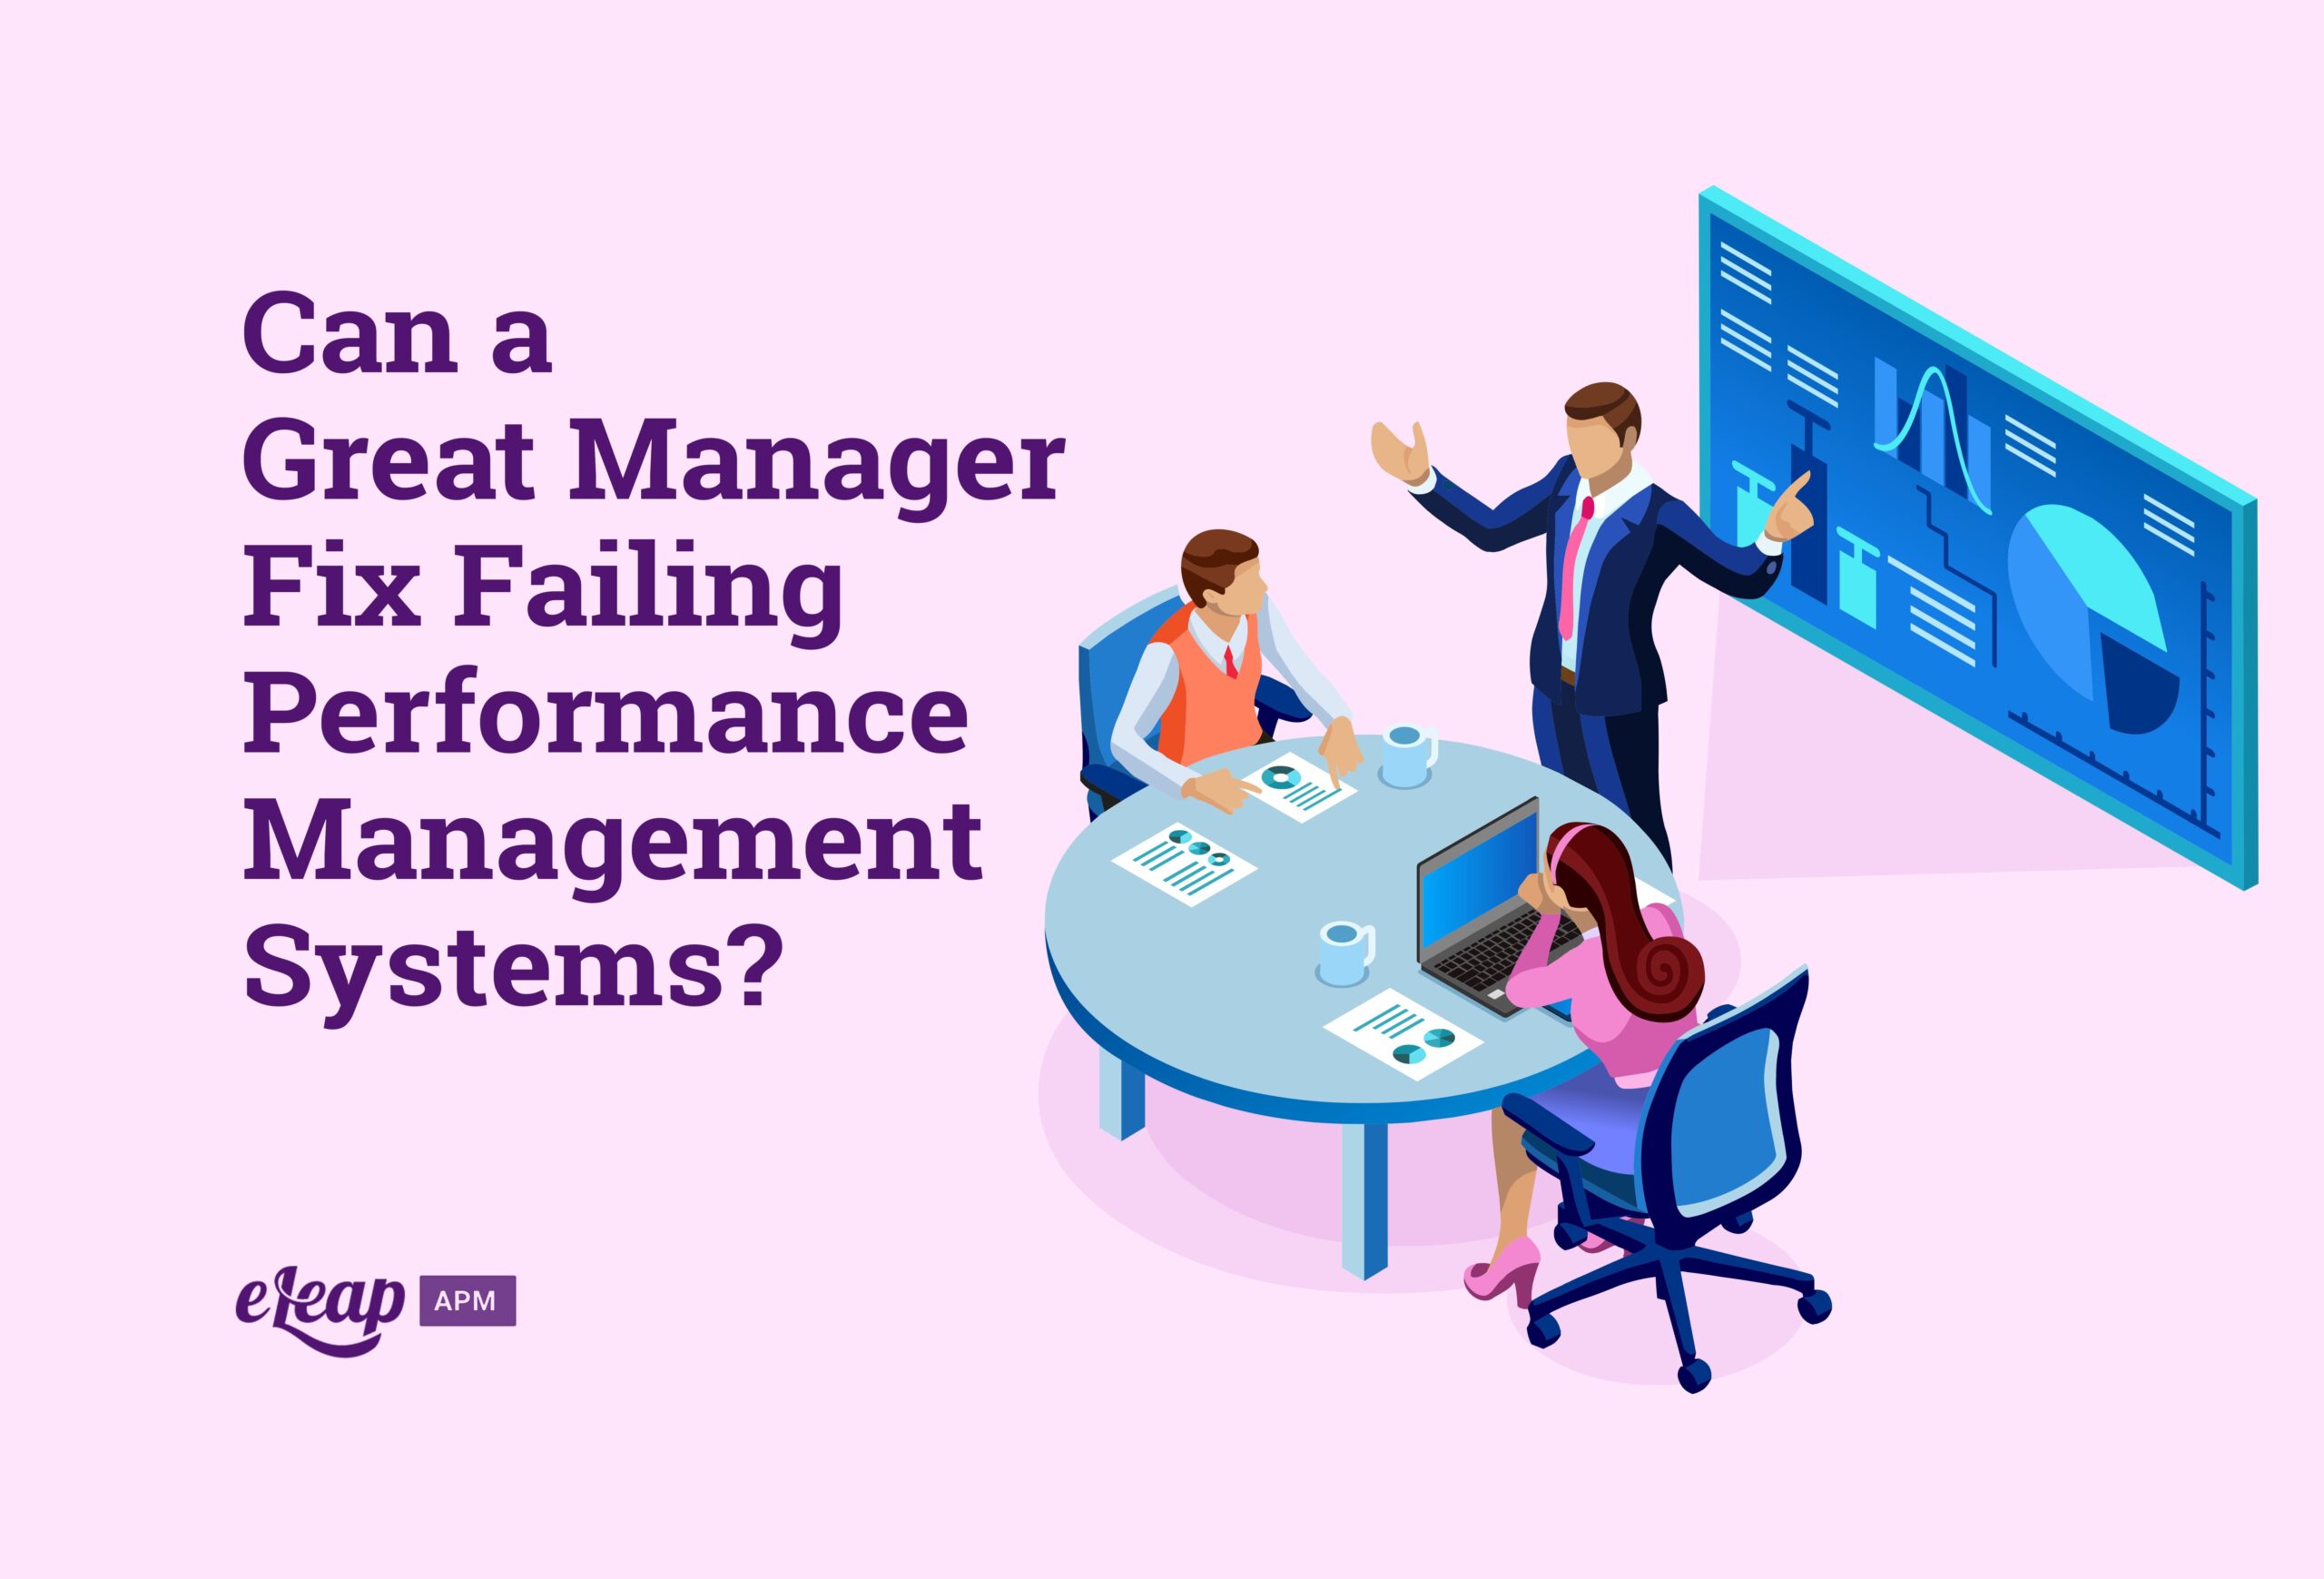 Can a Great Manager Fix Failing Performance Management Systems?